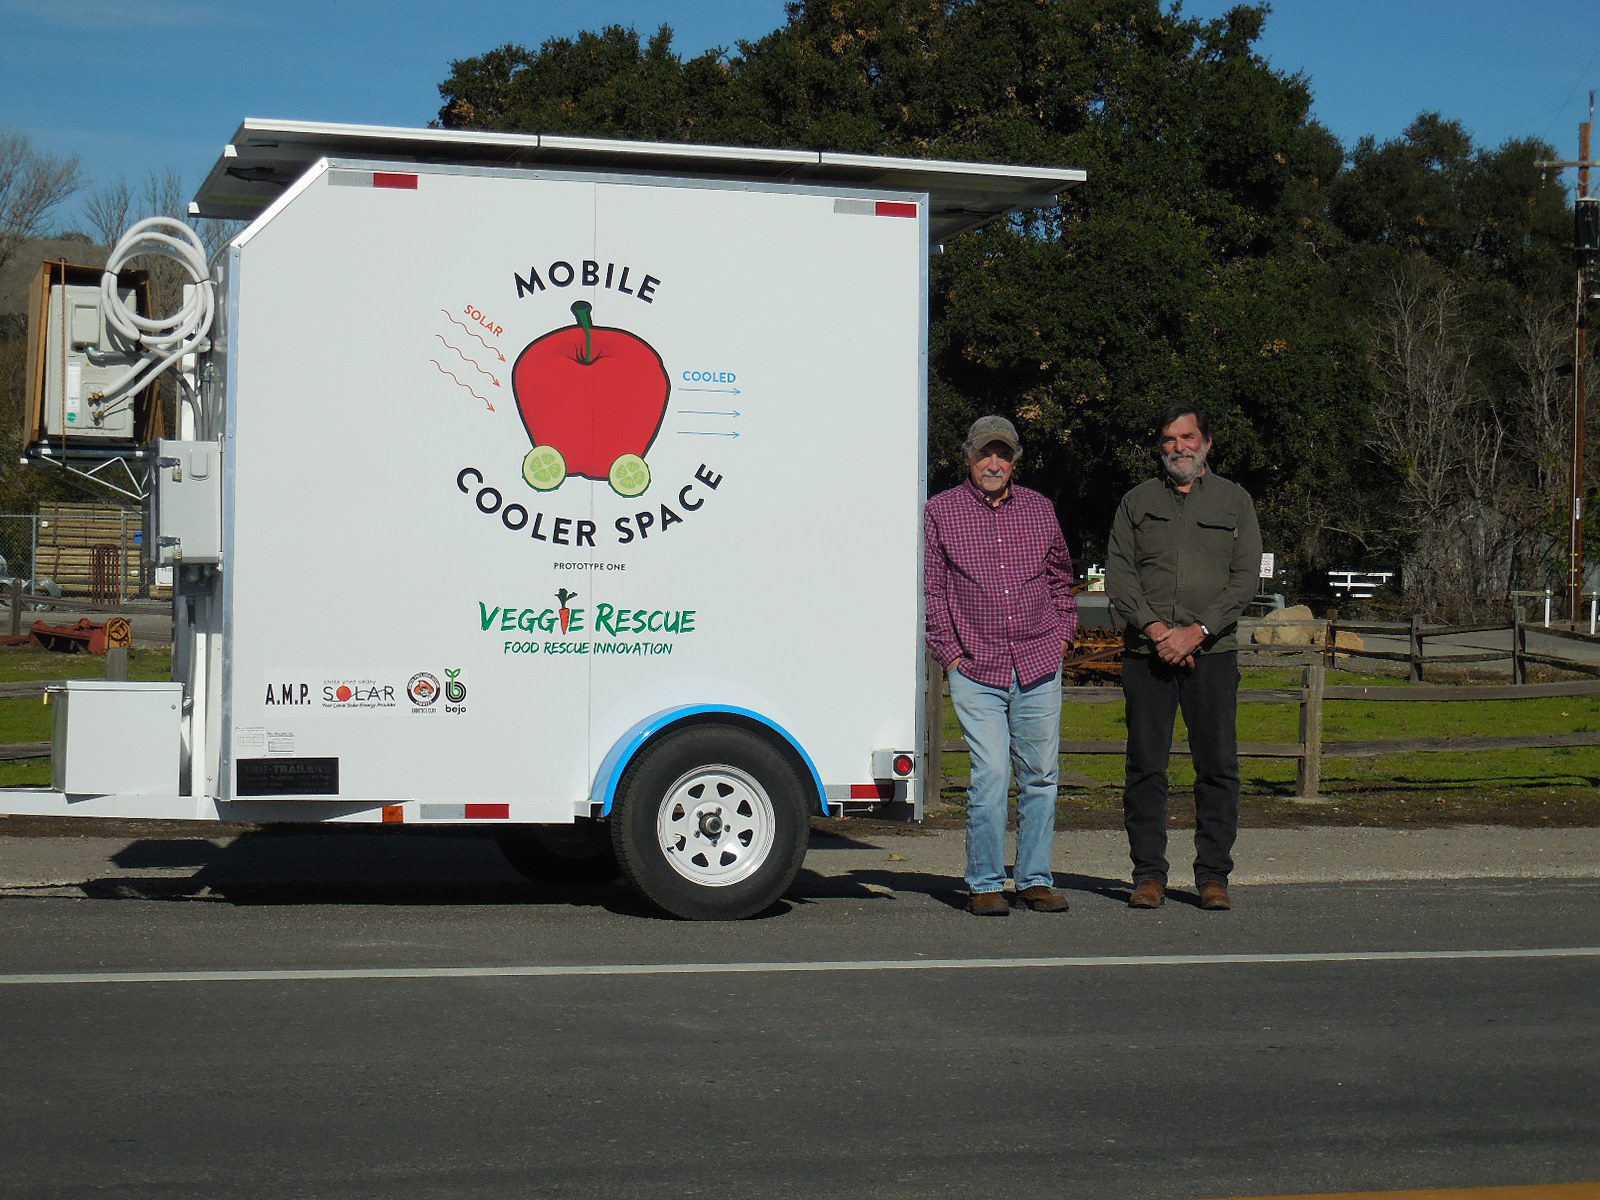 Veggie Rescue serves up a new tool for feeding people